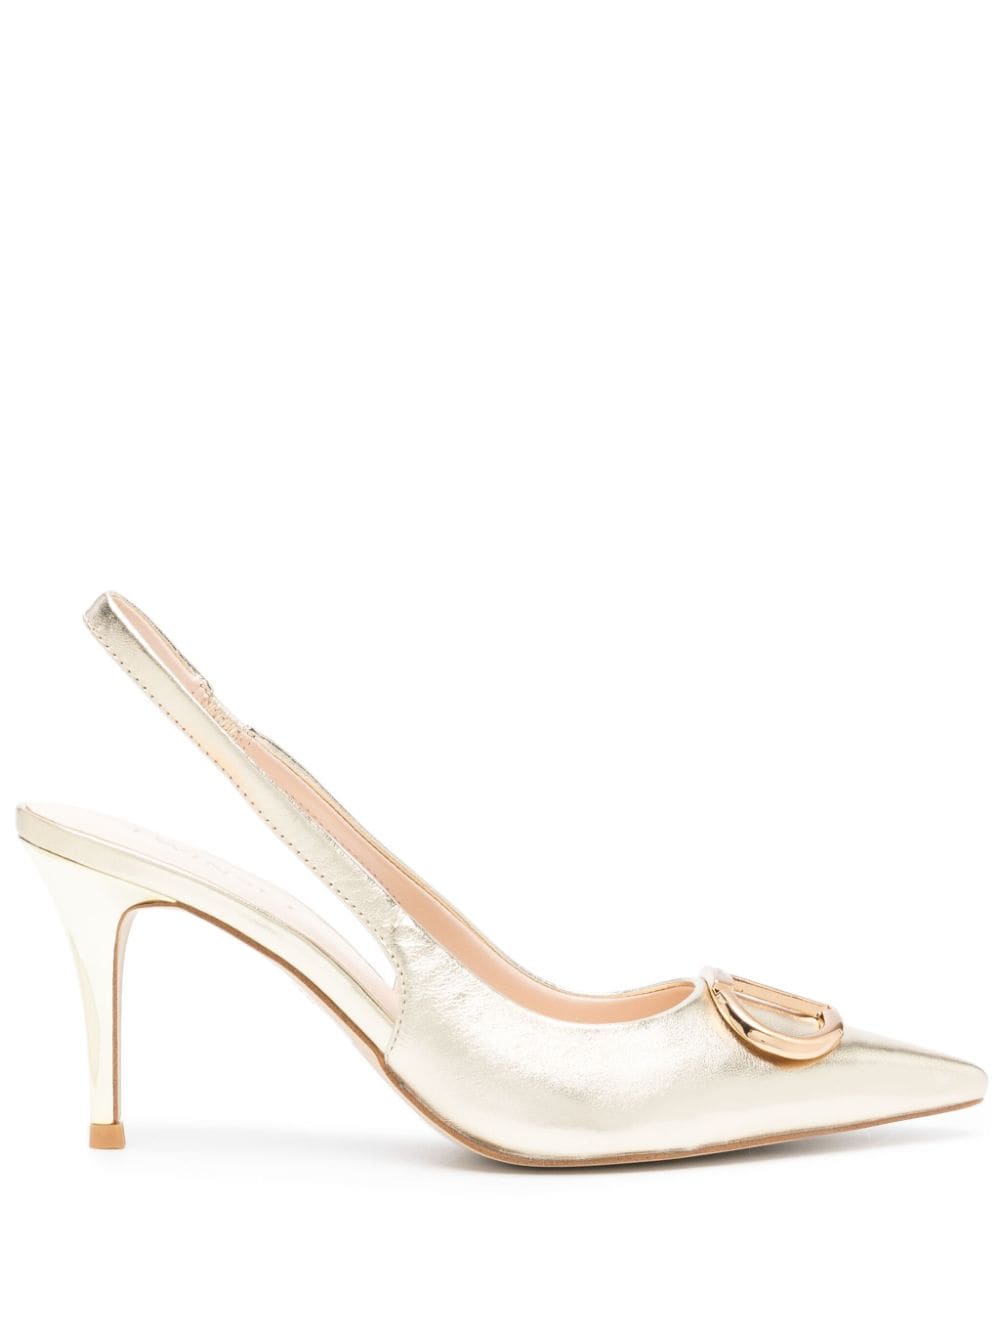 TWINSET Oval T 80mm metallic leather pumps - Gold von TWINSET